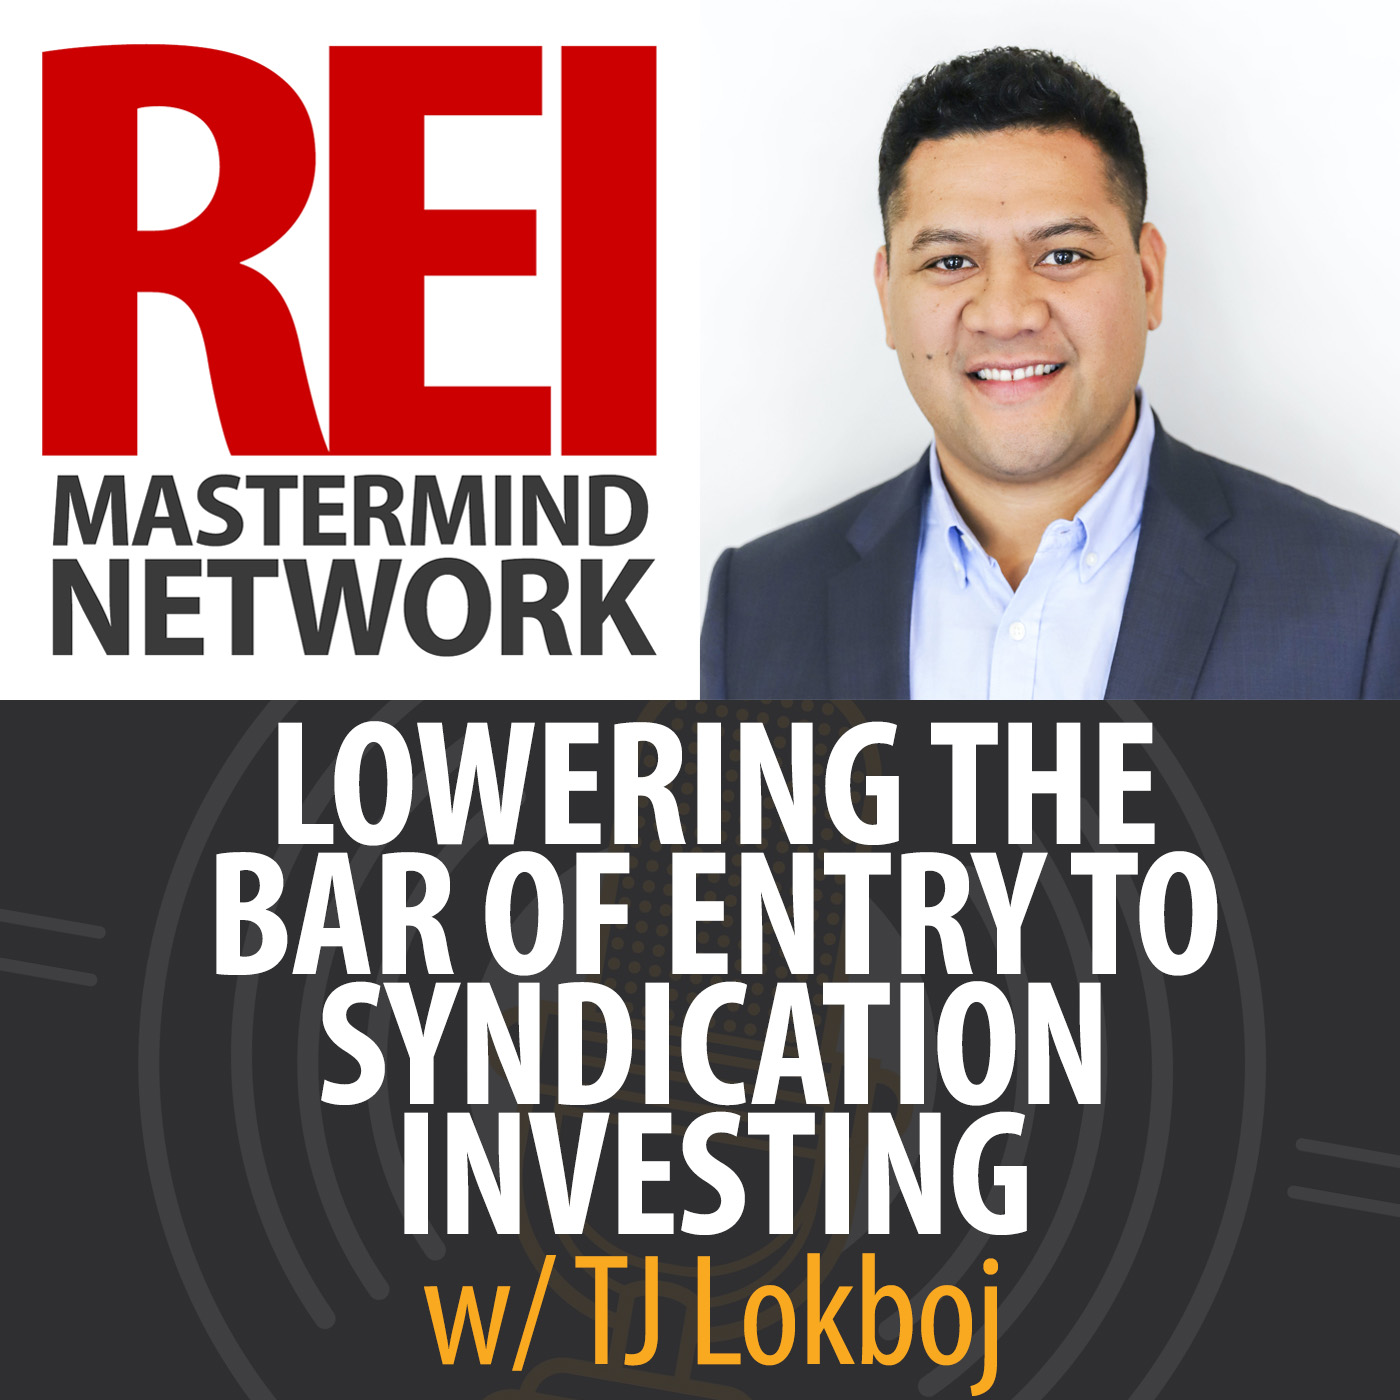 Lowering the Bar of Entry to Syndication Investing with TJ Lokboj